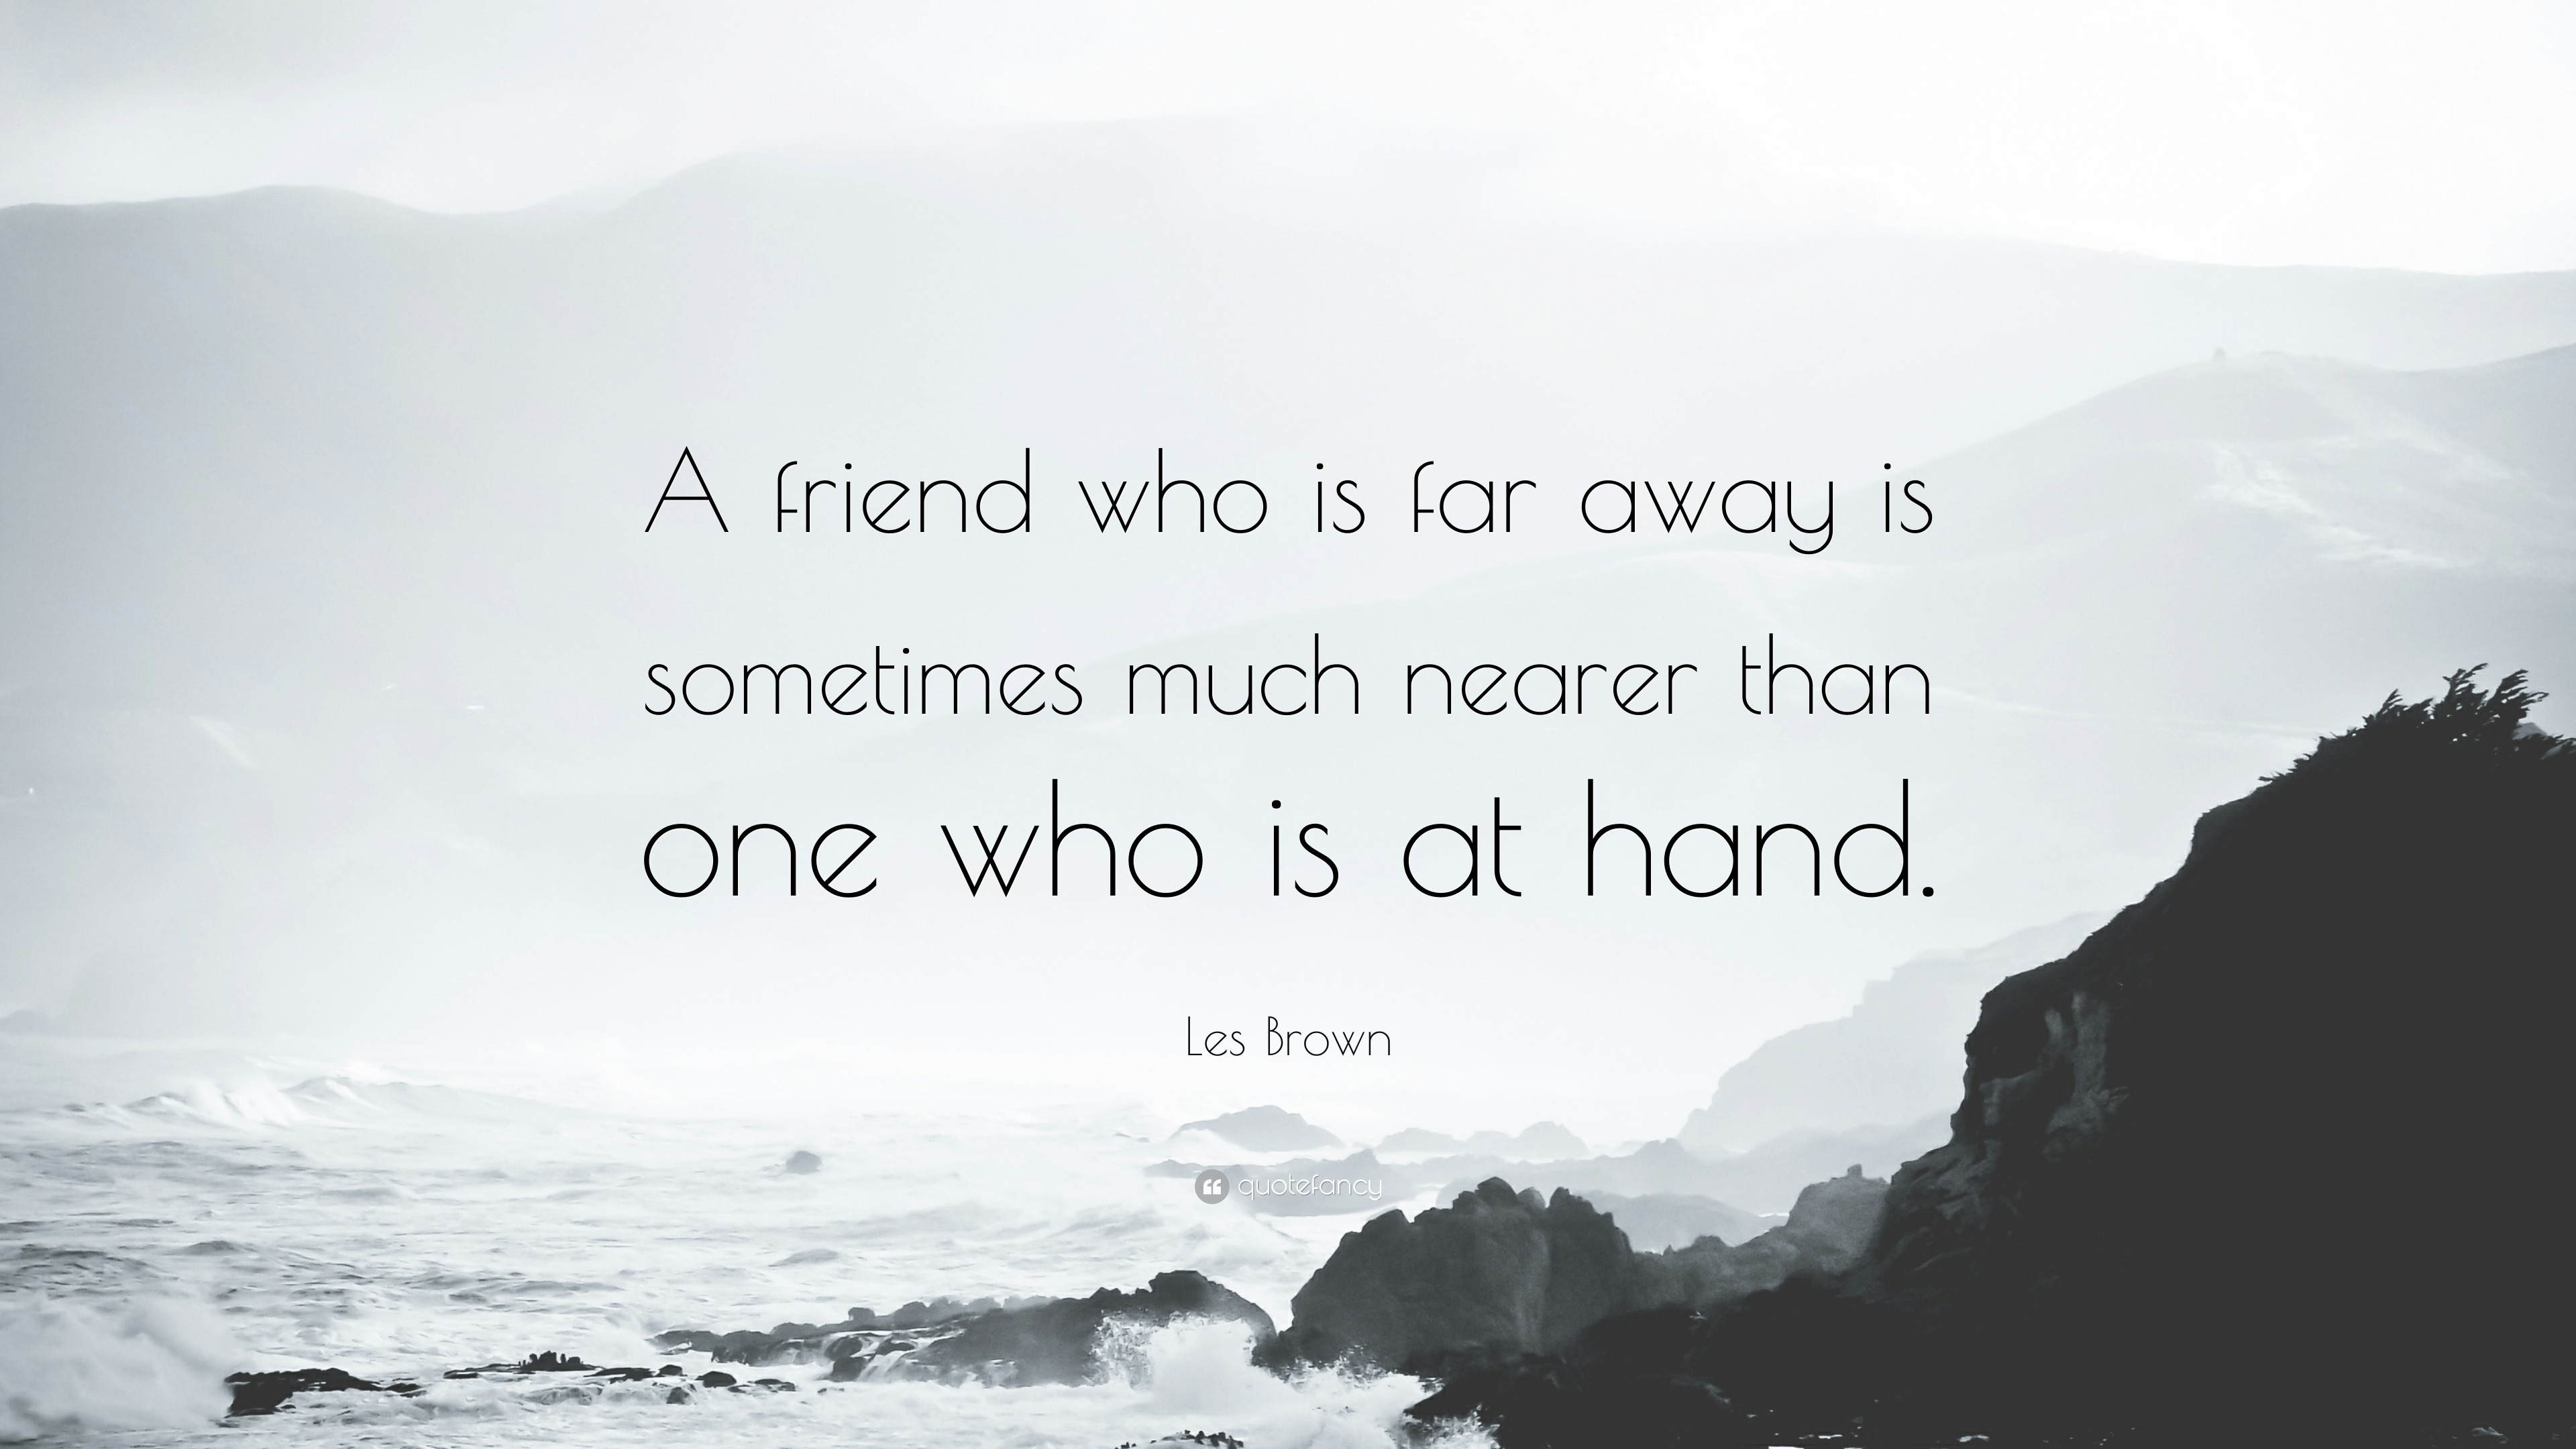 Les Brown Quote: “A friend who is far away is sometimes much nearer ...